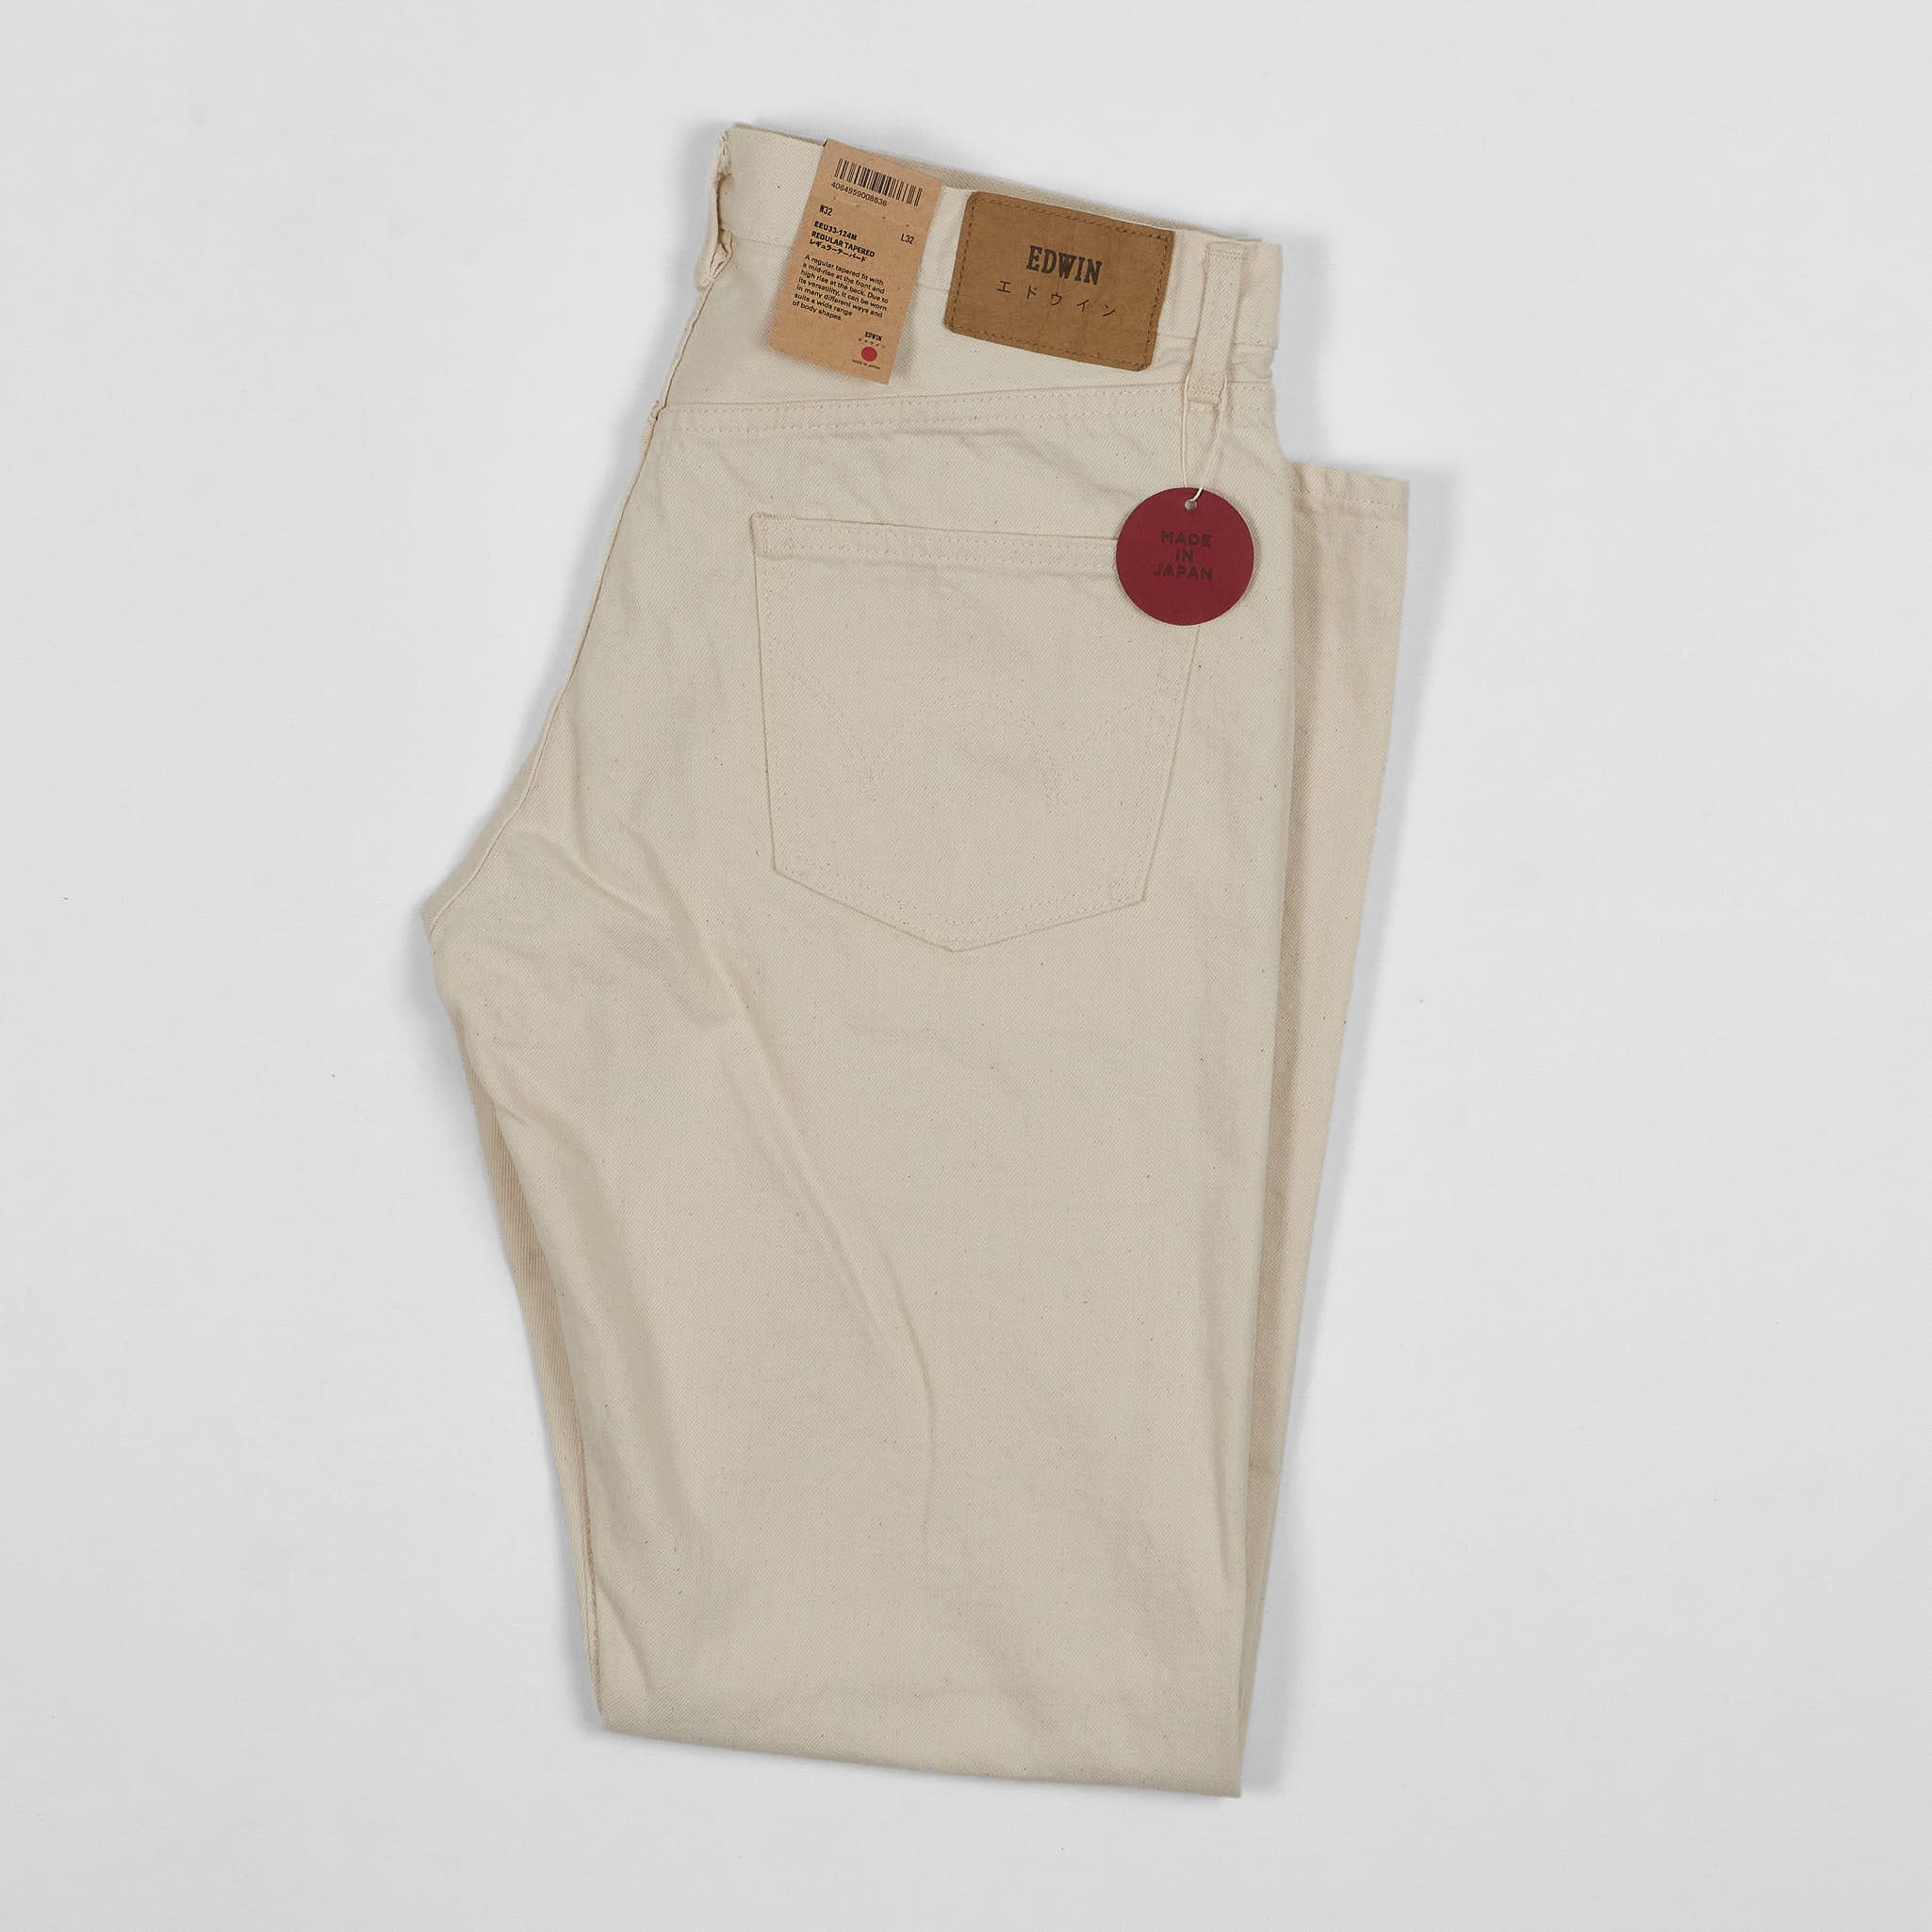 Edwin Wide Pant Selvage Jeans